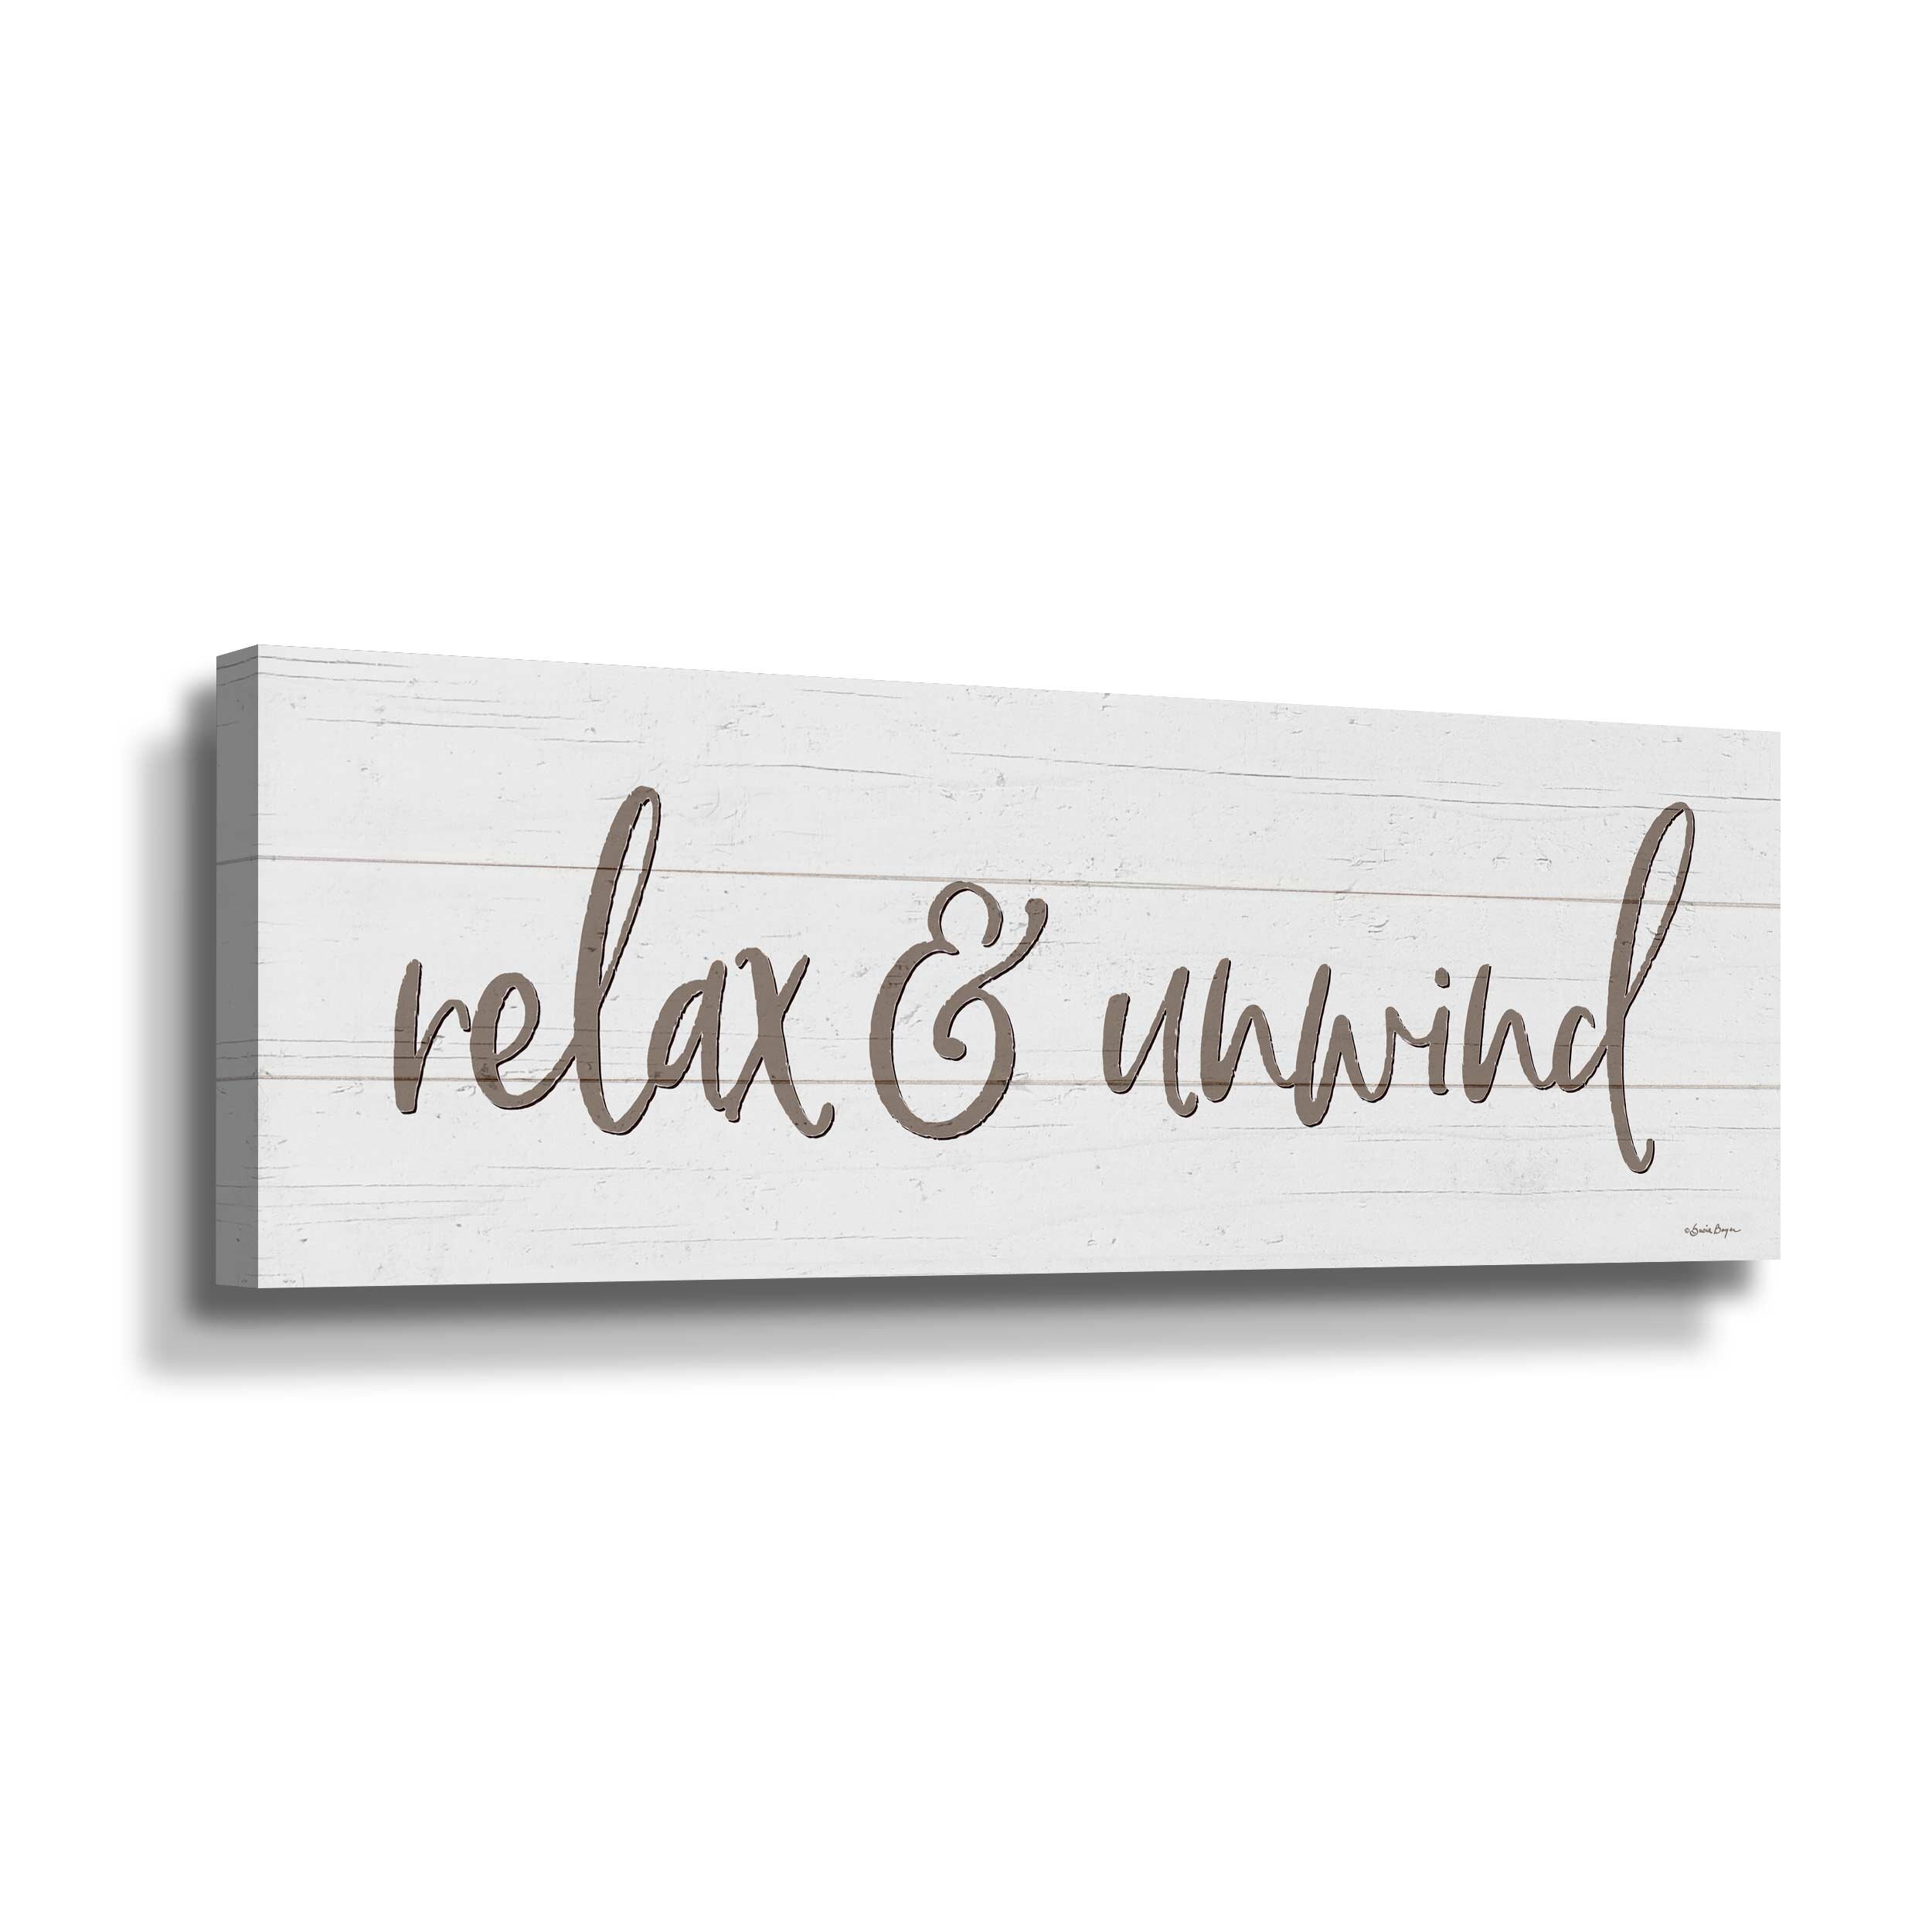 Relax and unwind home gift handwritten text Quote Motivational print 